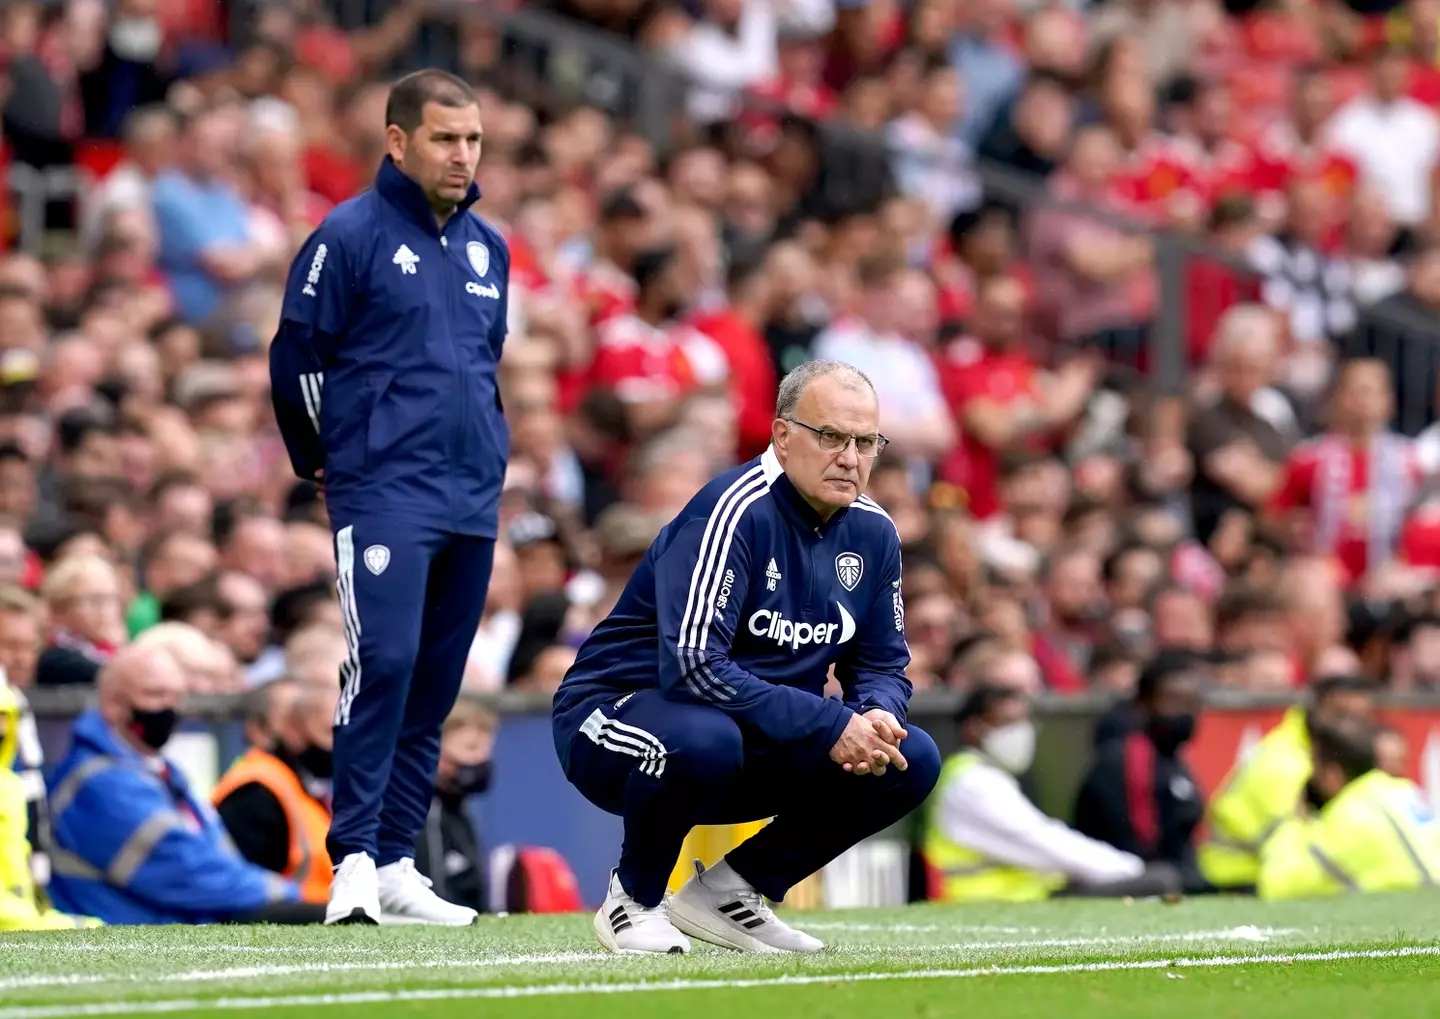 Marcelo Bielsa was visibly furious after Leeds United were thrashed by Manchester United last weekend